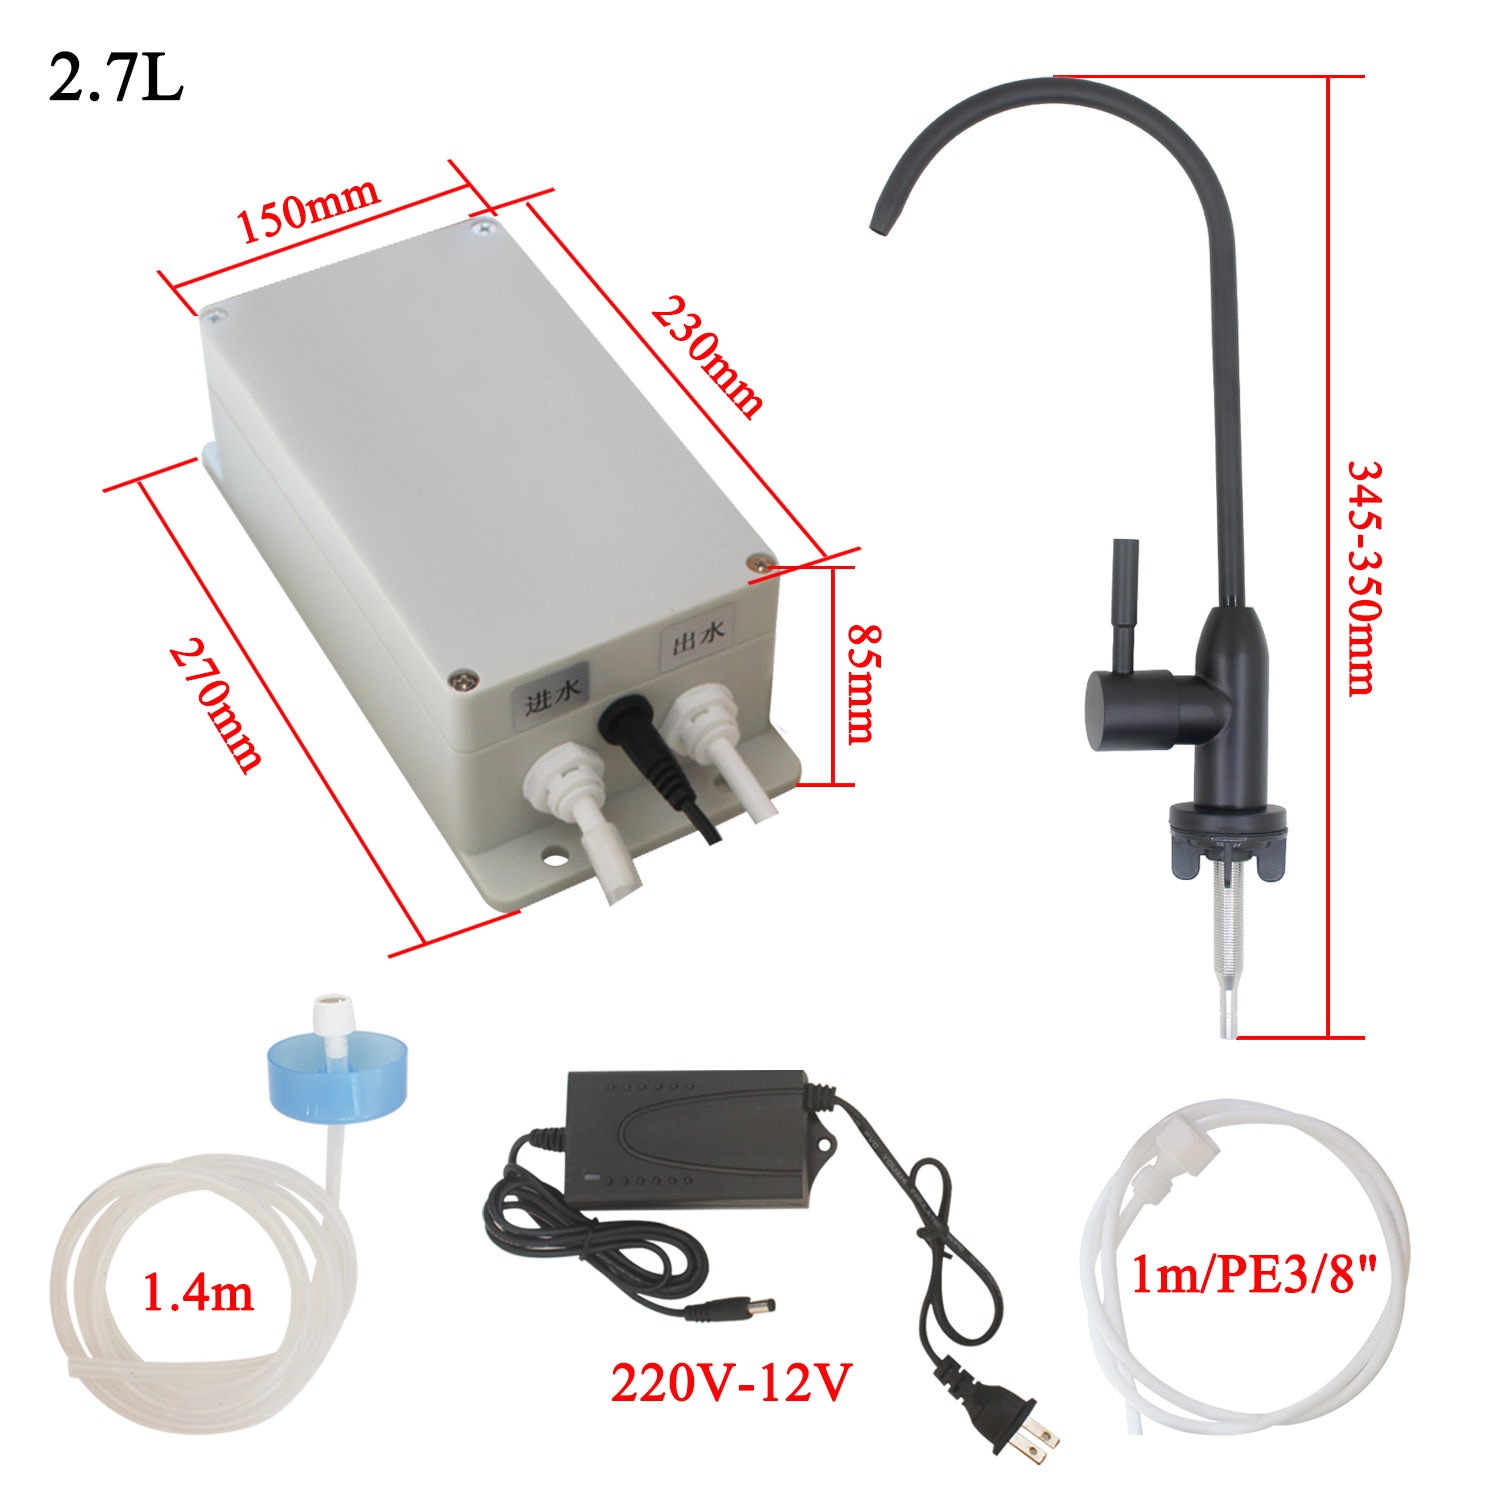 12V RV electric galley water pump & faucet automatic water suction pump clamp- boat caravan motorhome 1.5L/min - image 5 of 5